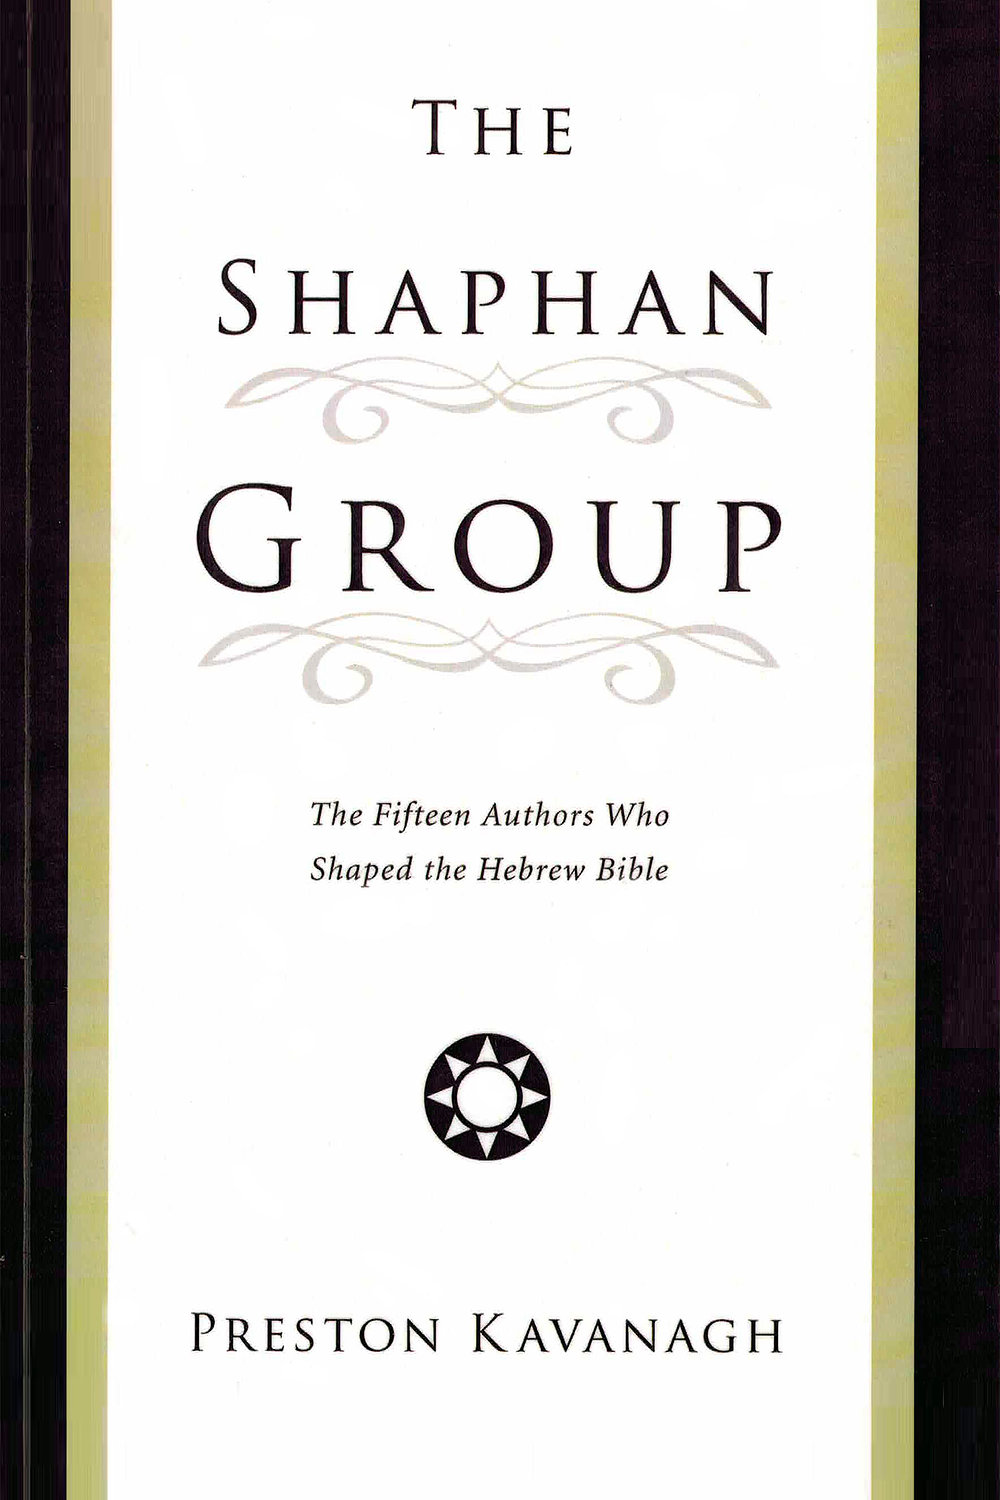 The Shaphan Group